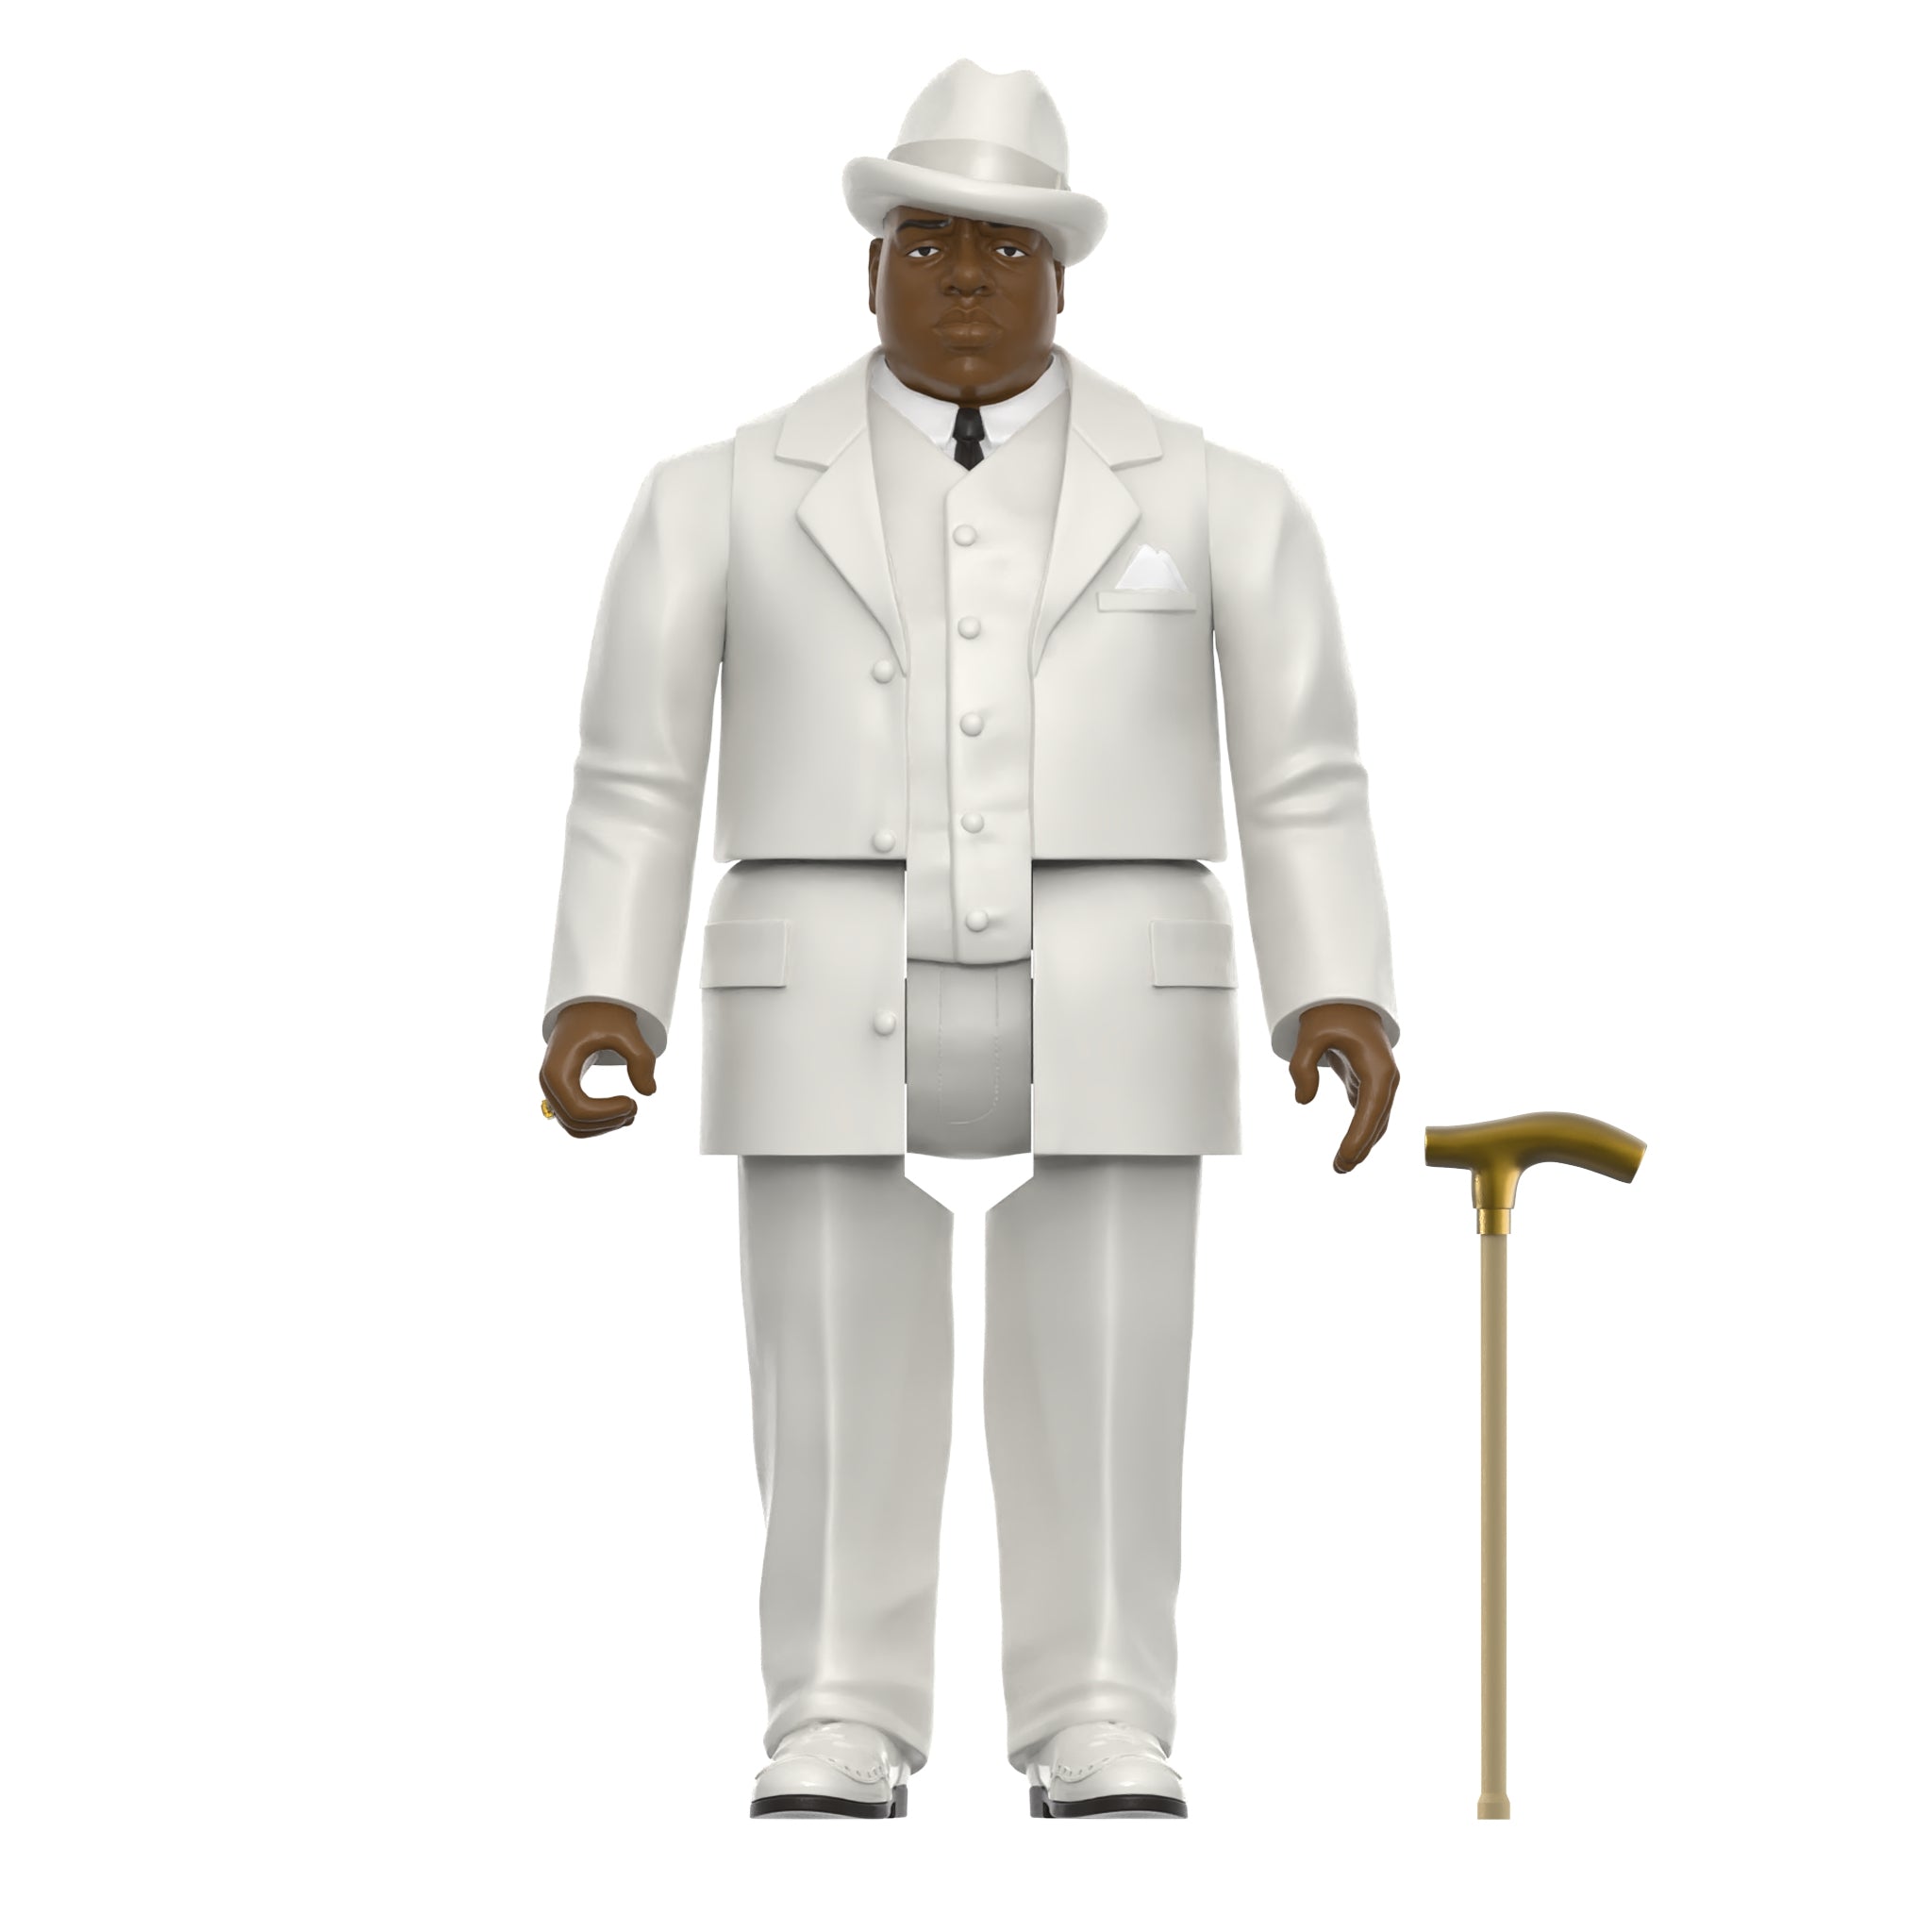 THE NOTORIOUS B.I.G REACTION FIGURE - WHITE SUIT